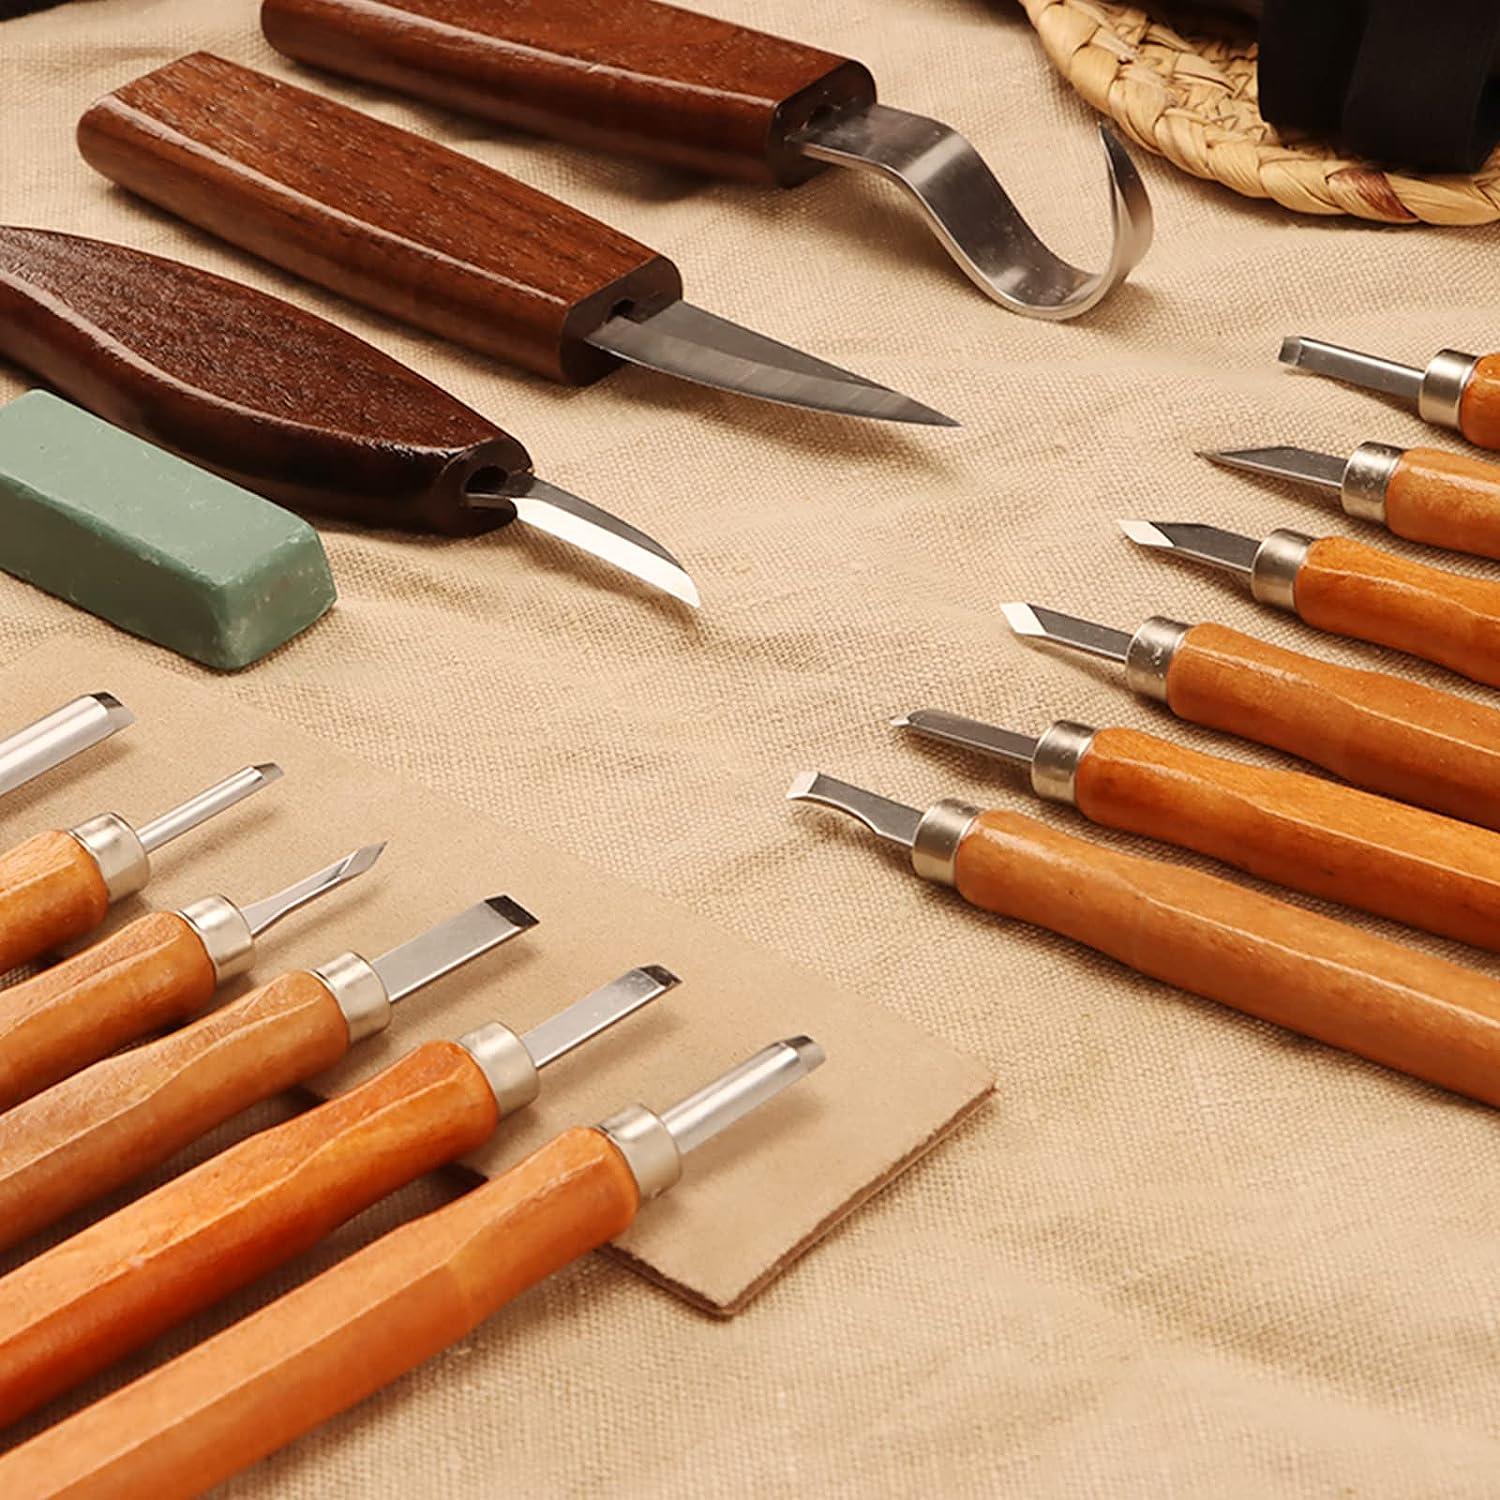 Woodworking Whittling Kit, Wood Carving Tool Set